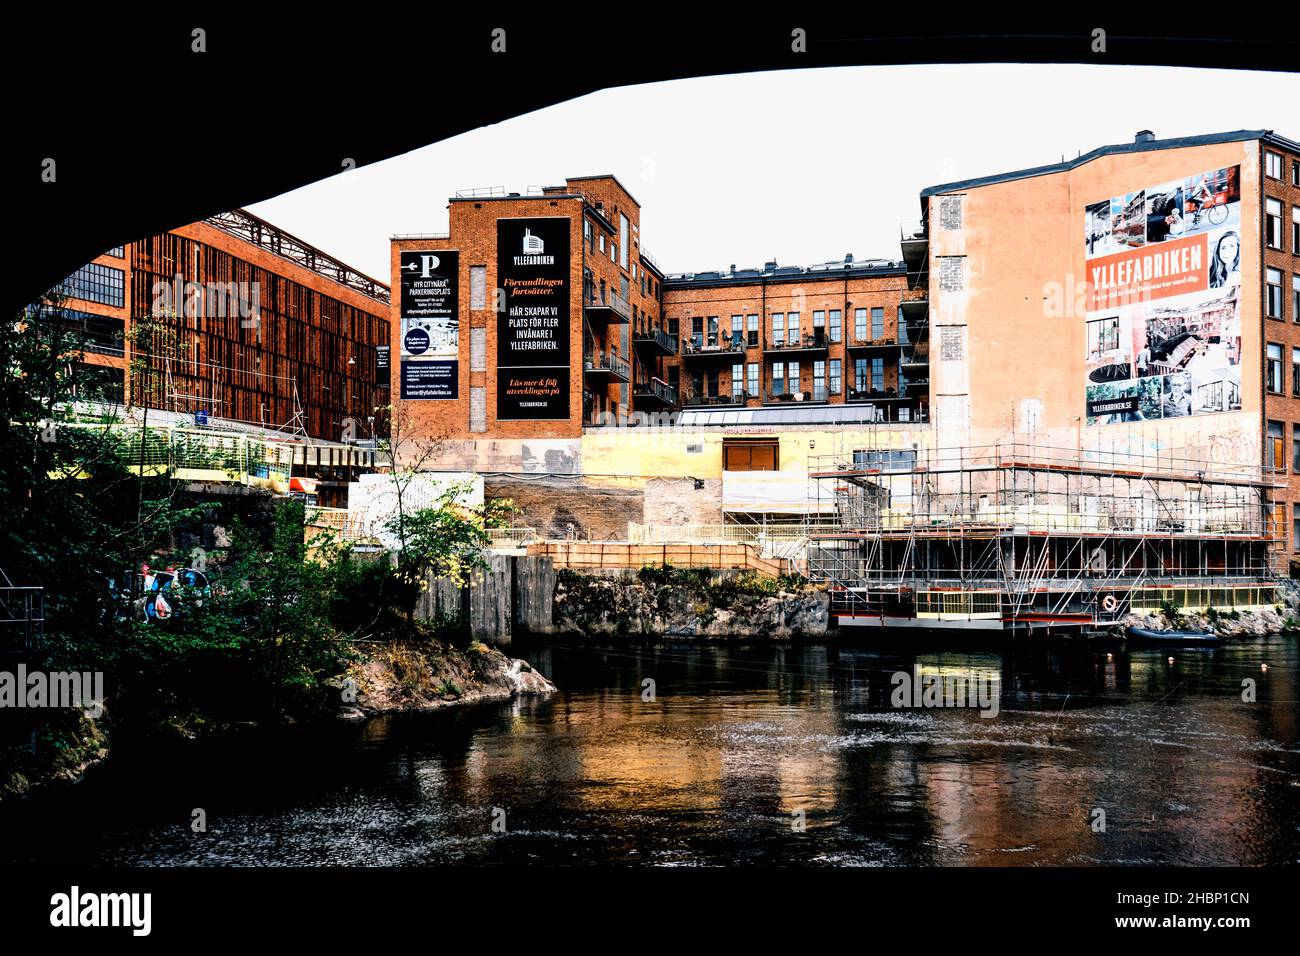 The new quarter of Norrköping. old industrial buildings are being converted into a residential area Stock Photo